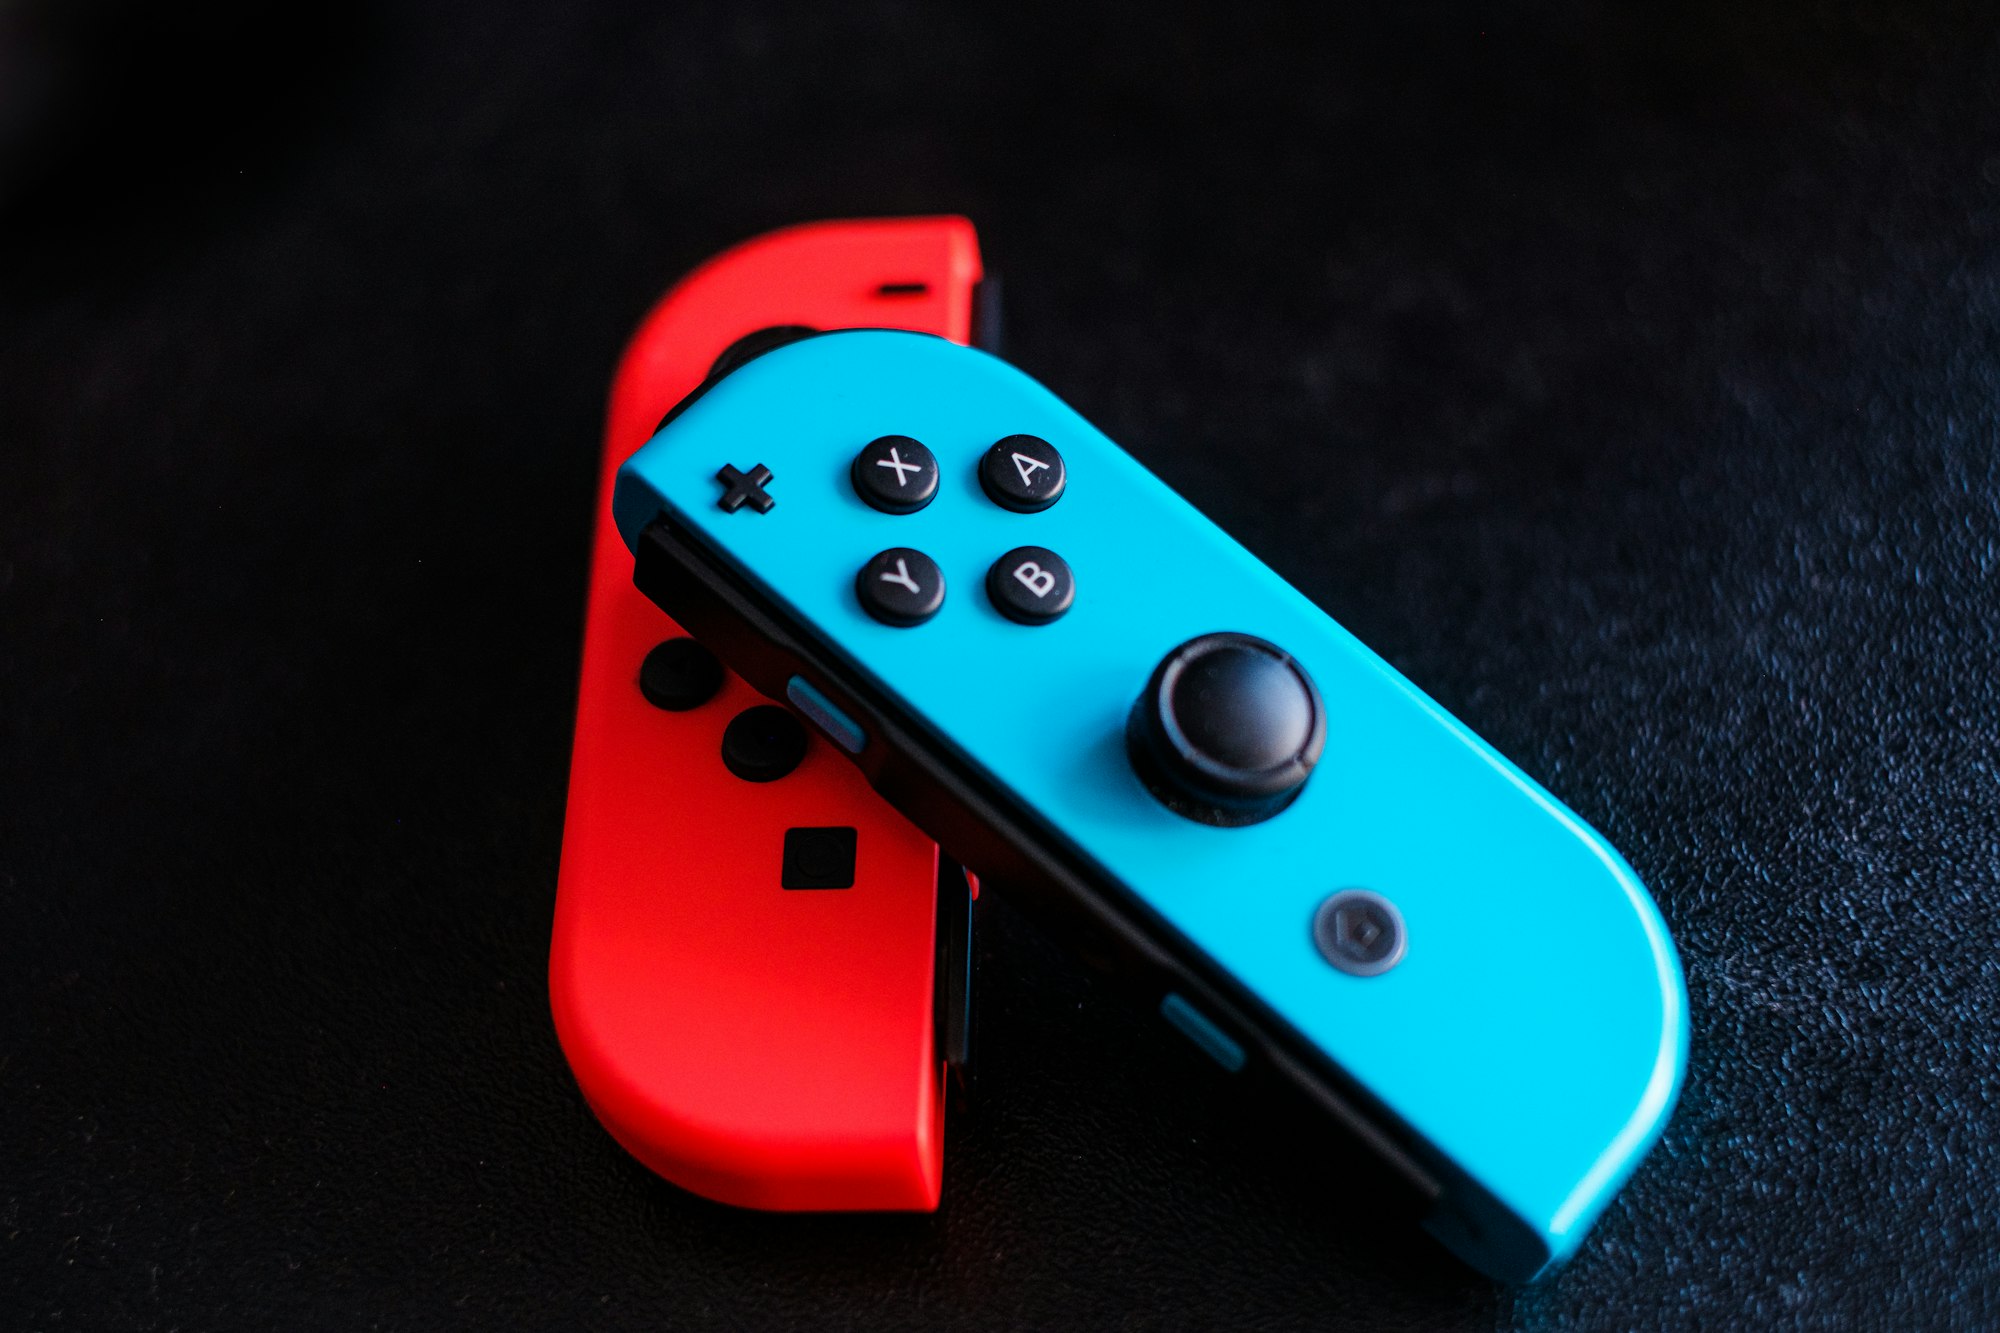 How to Connect JoyCon Controllers to Anki for Medical School (MacOS)